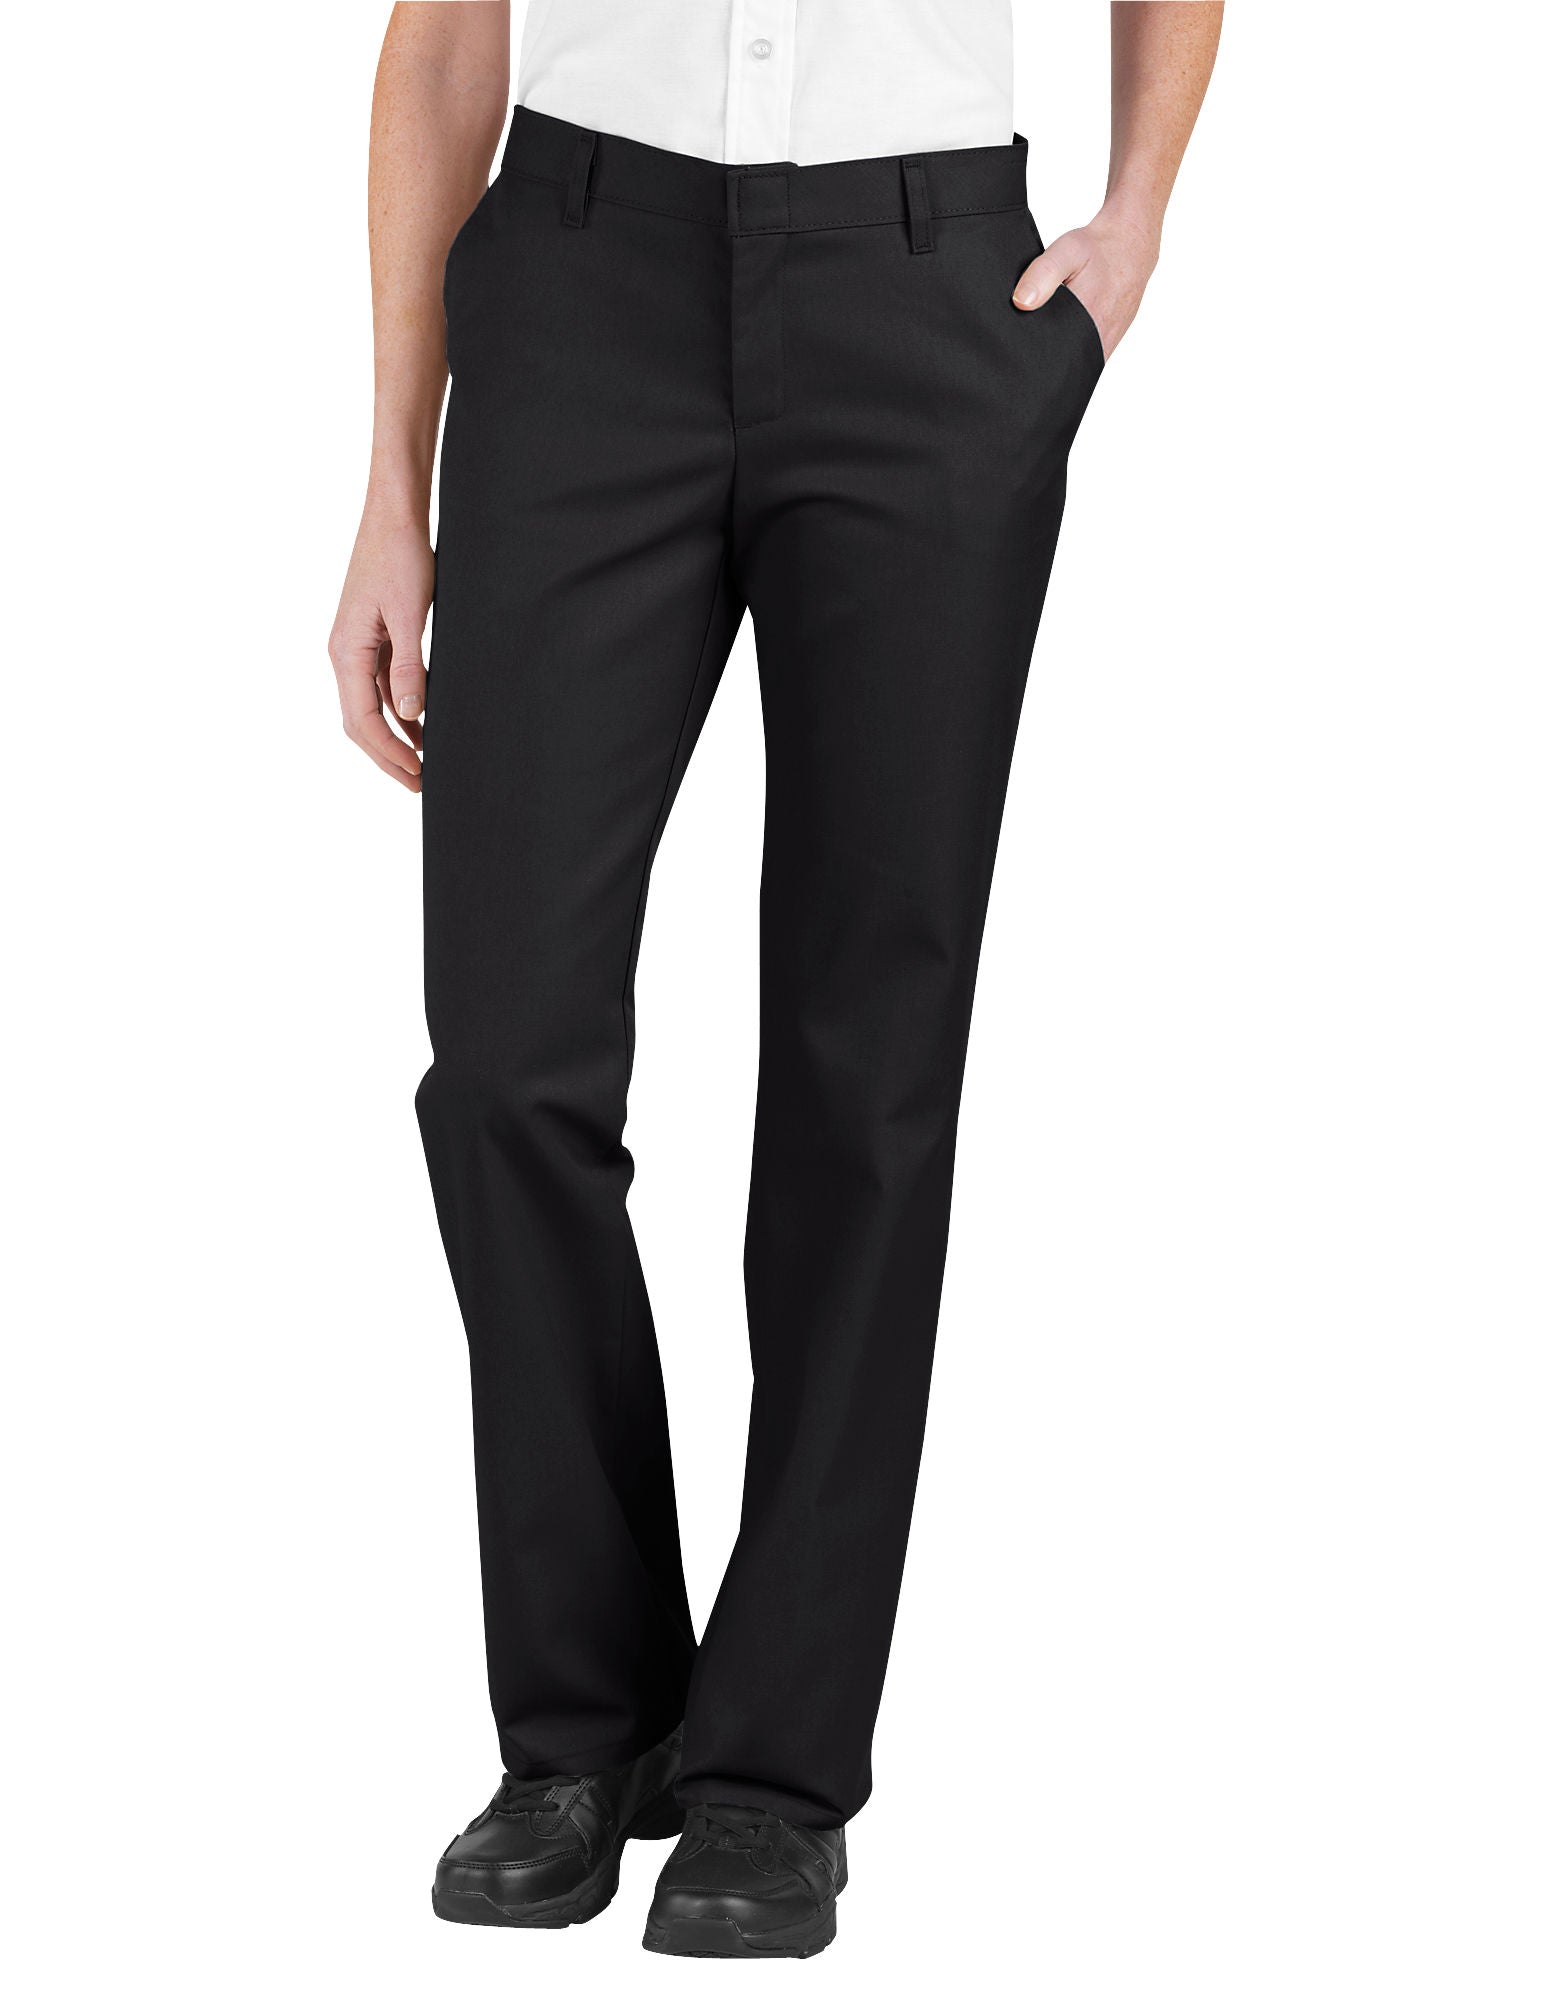 DIC-FP322 - Dickies Womens Relaxed Fit Flat Front Pants